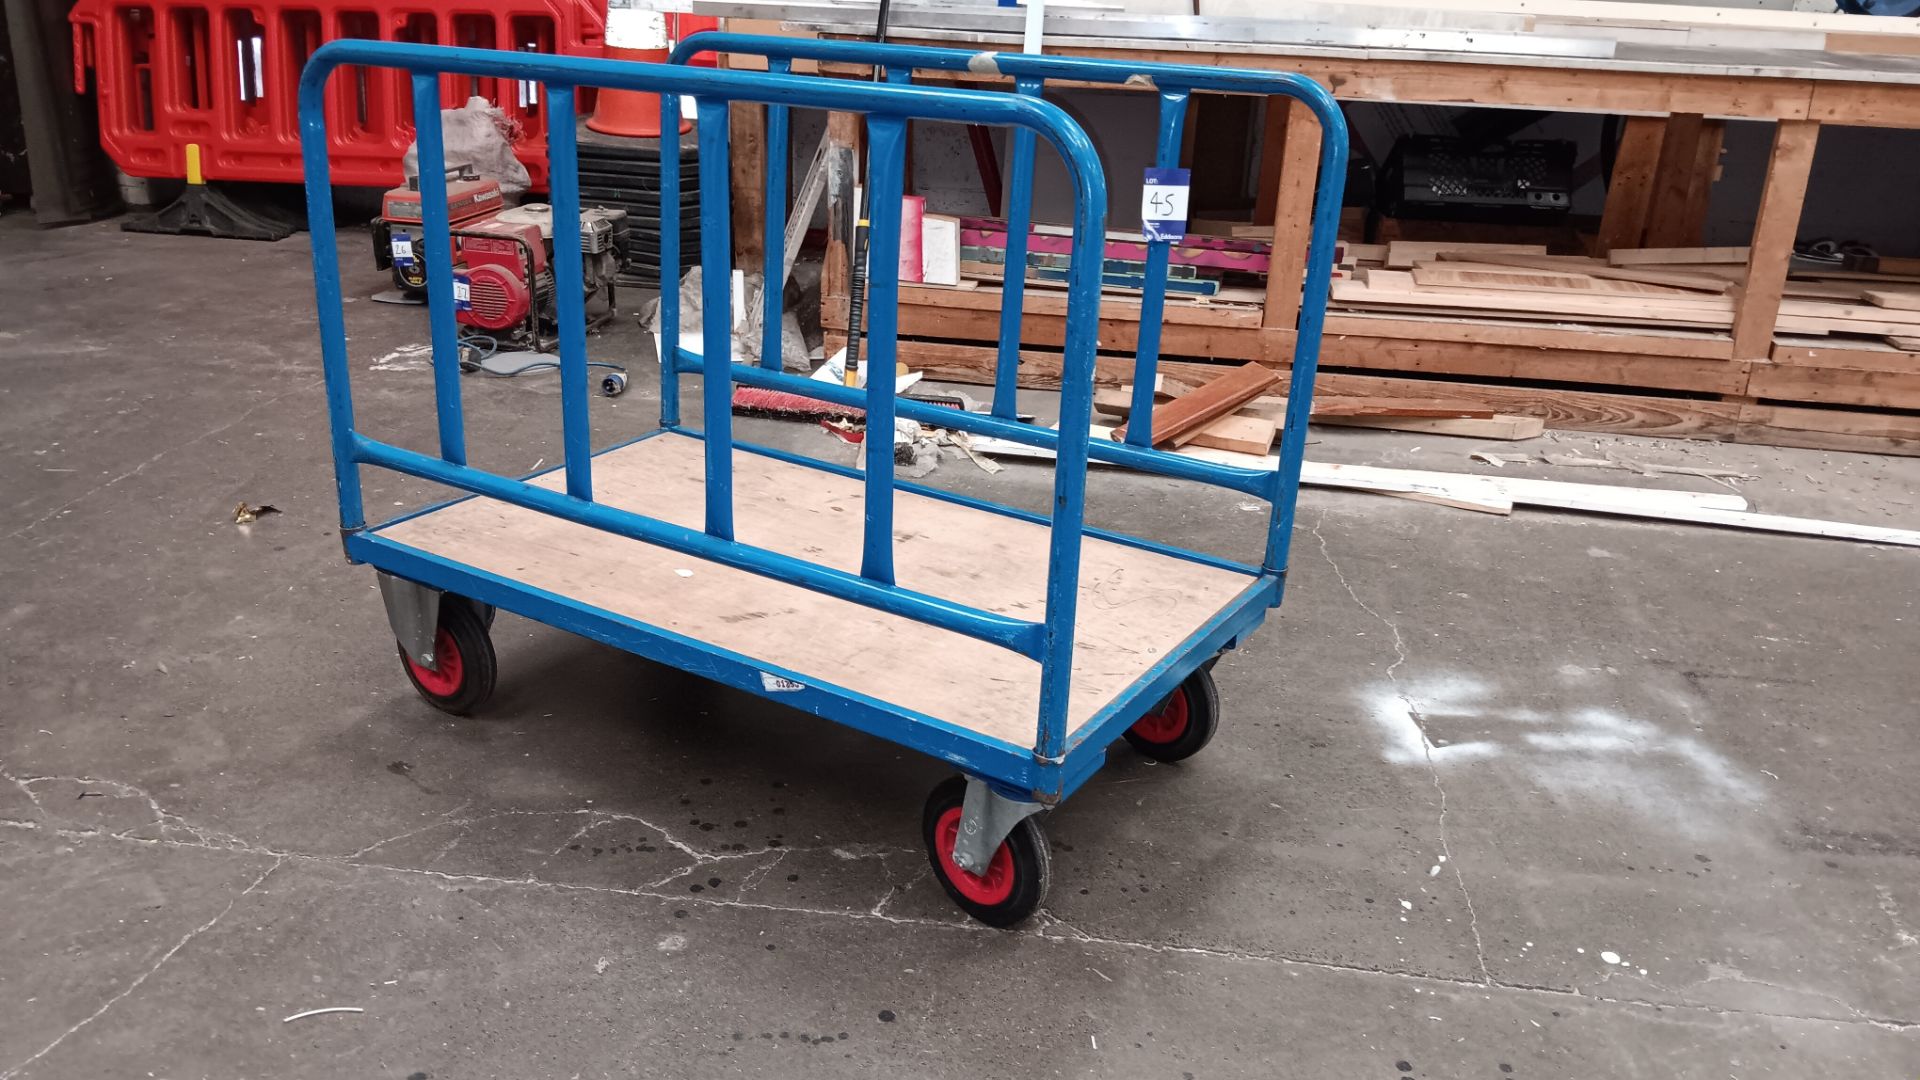 2 sided platform truck with plywood base – Located in Unit 3 - Bild 2 aus 2